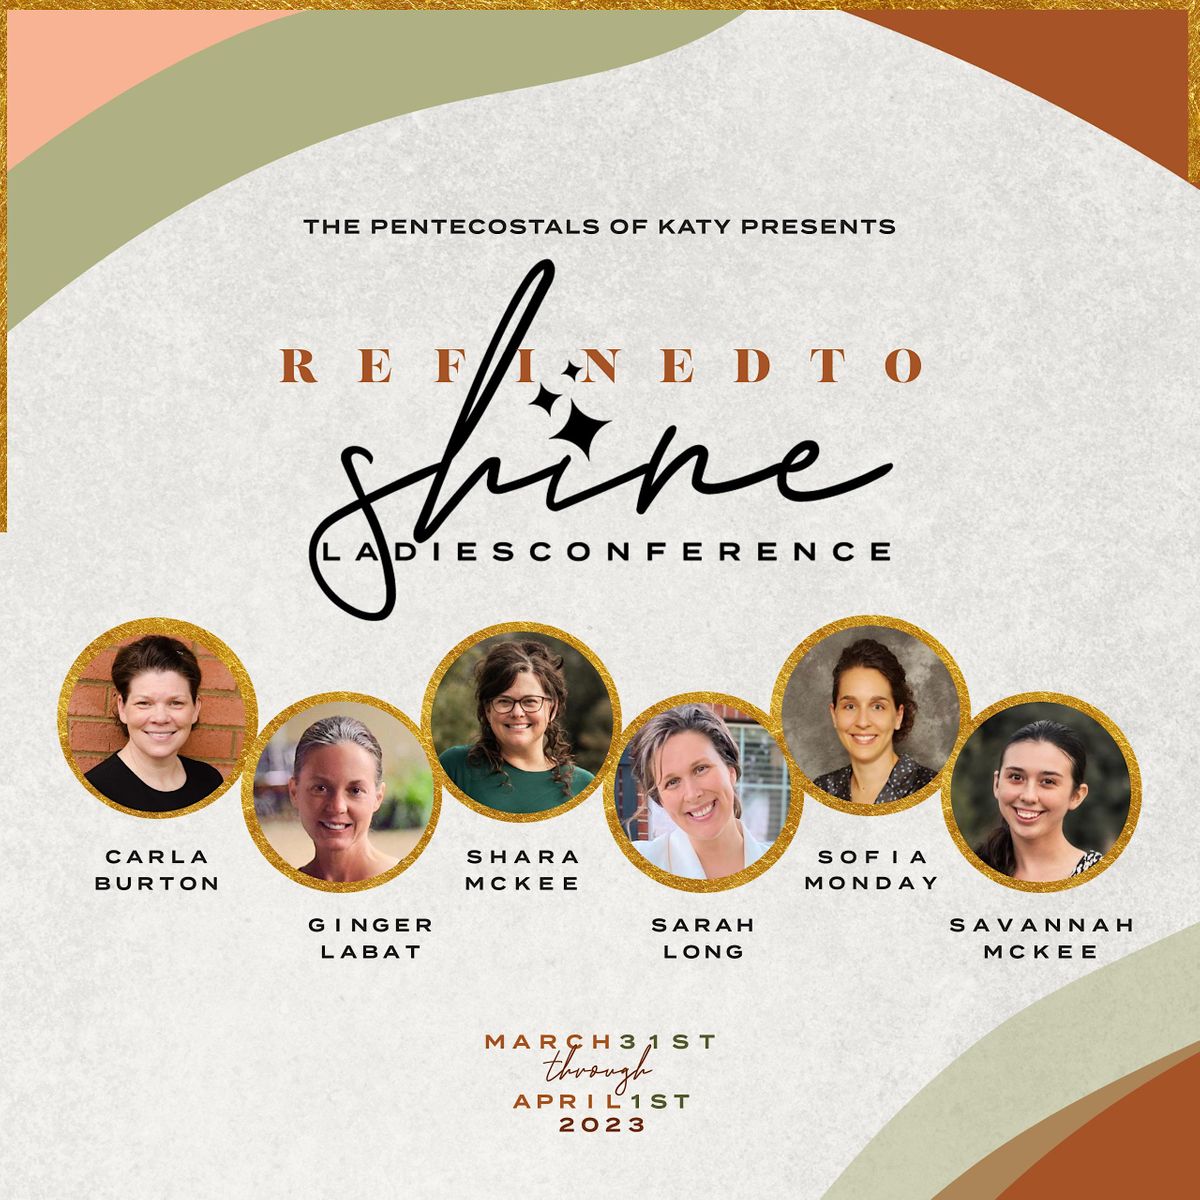 Shine Ladies Conference 2023 (Hosted by the Pentecostals of Katy